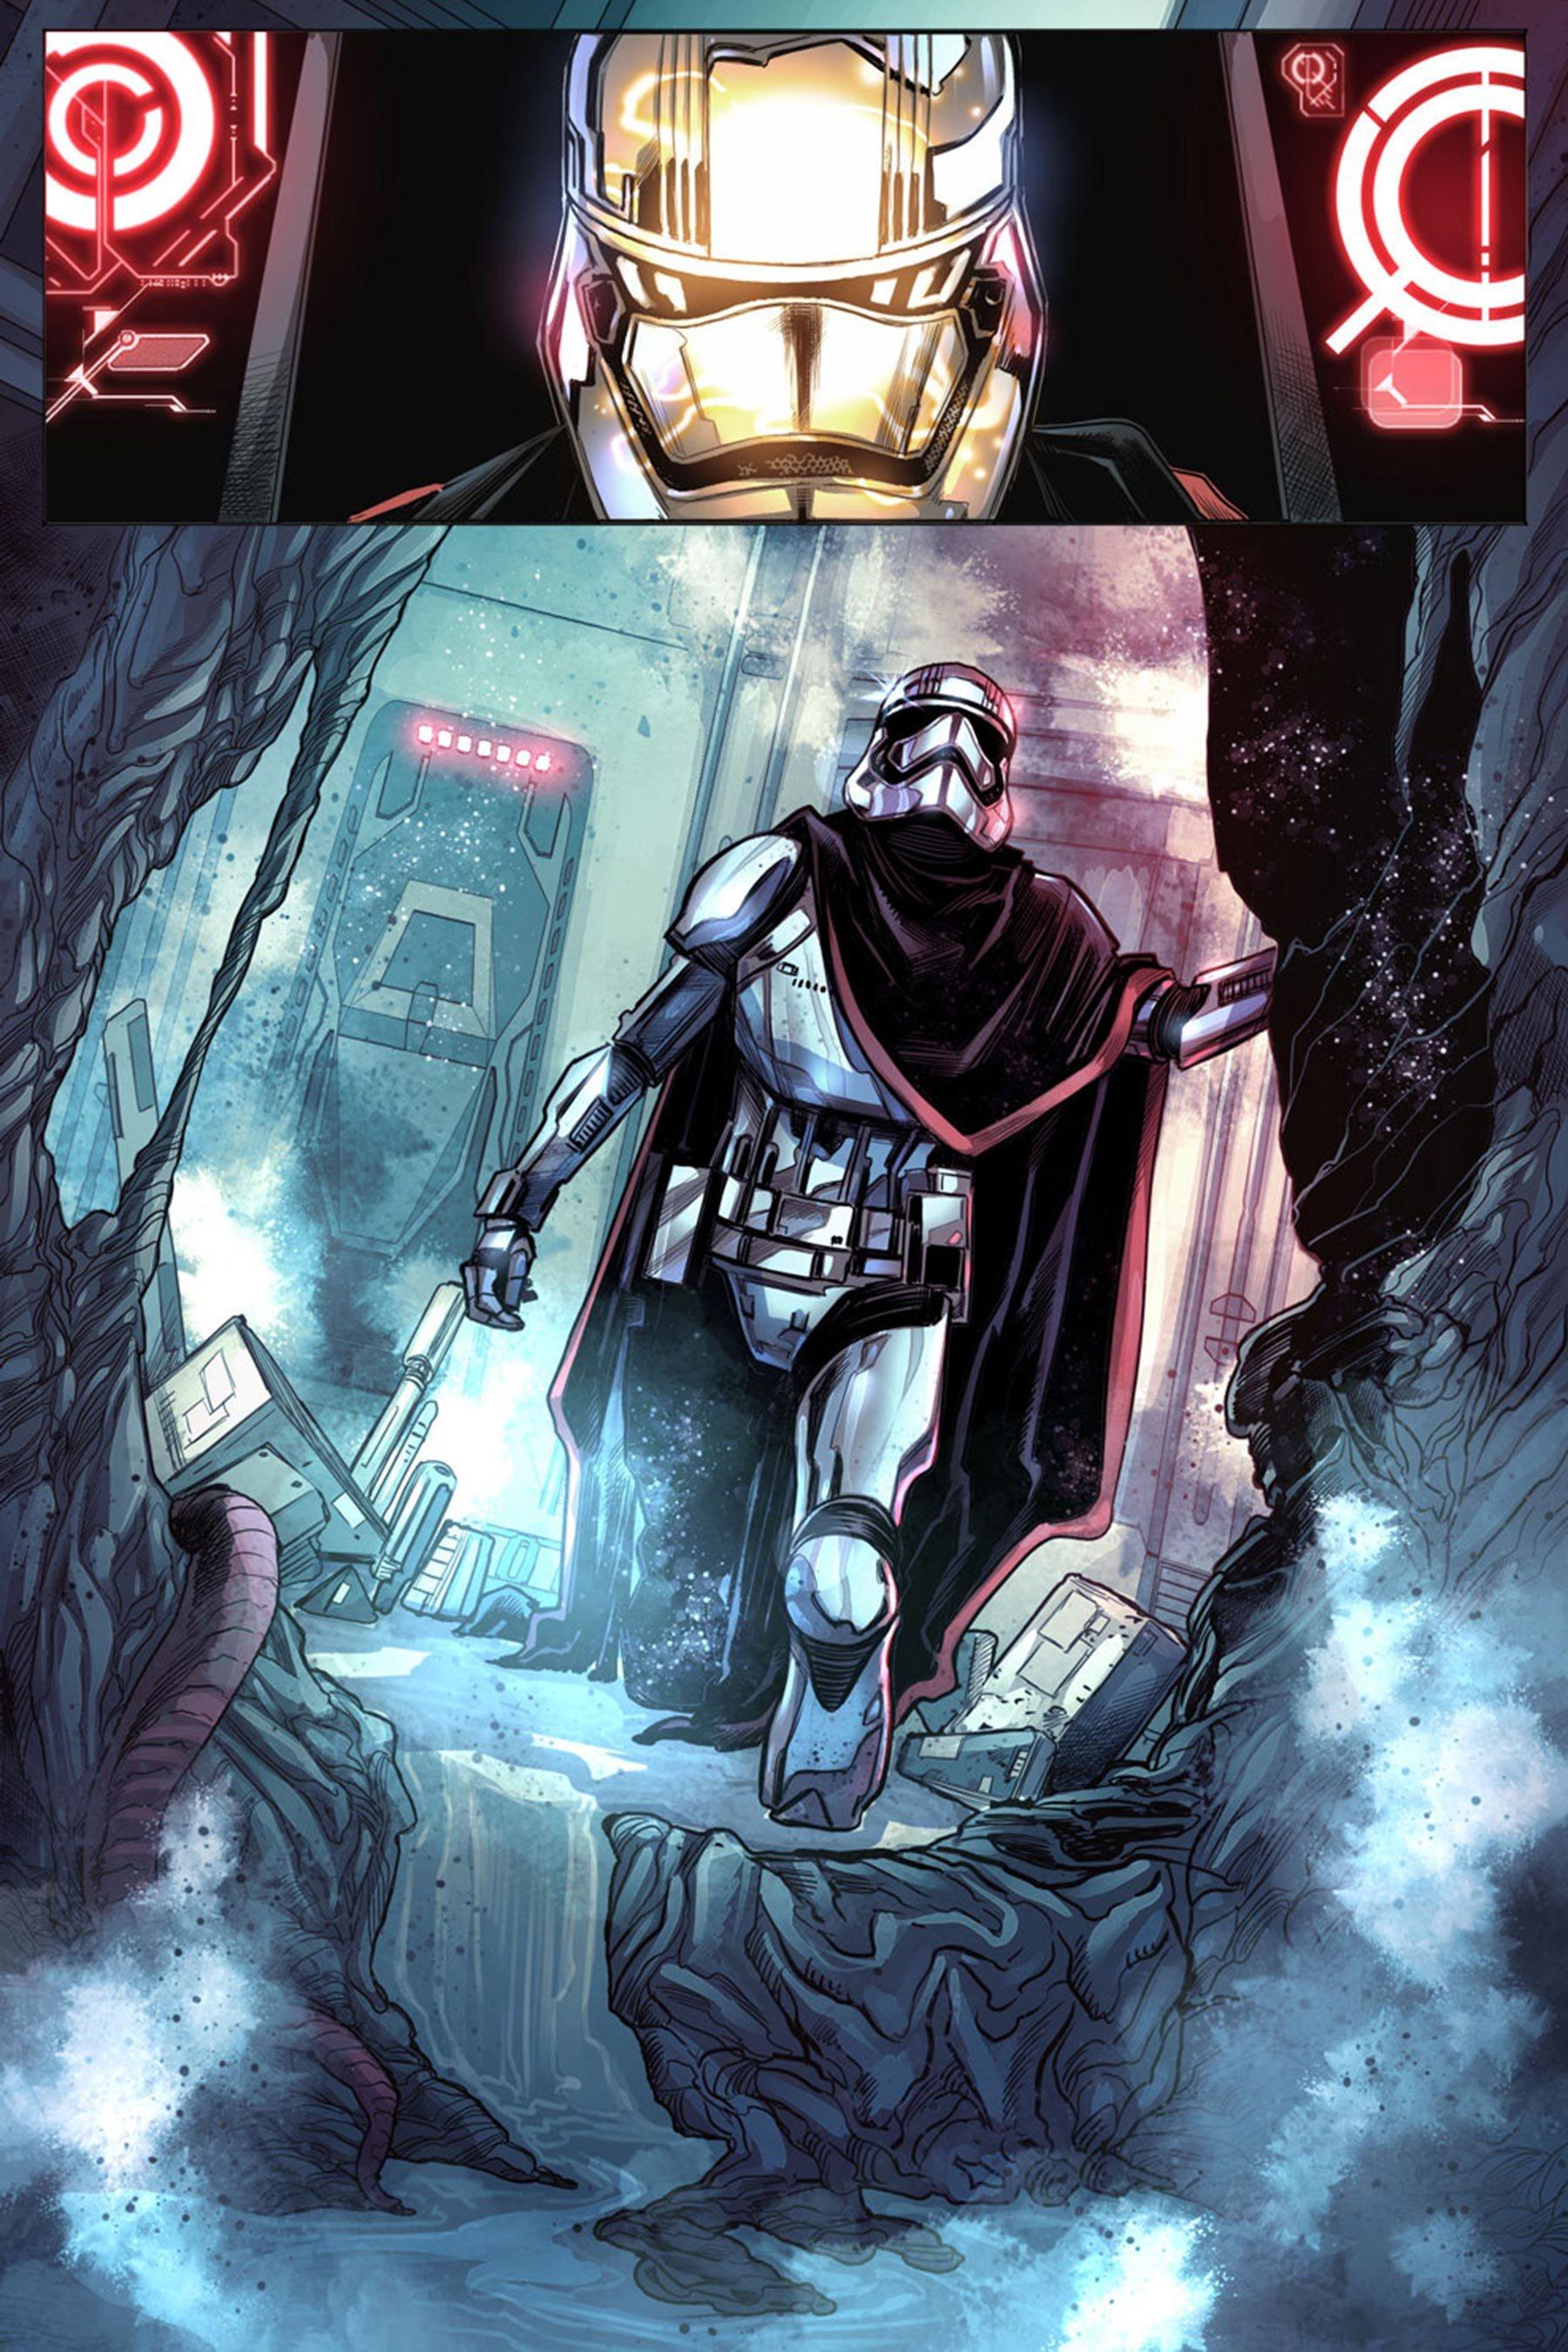 Marvel's Star Wars: Captain Phasma comic: Here are the first